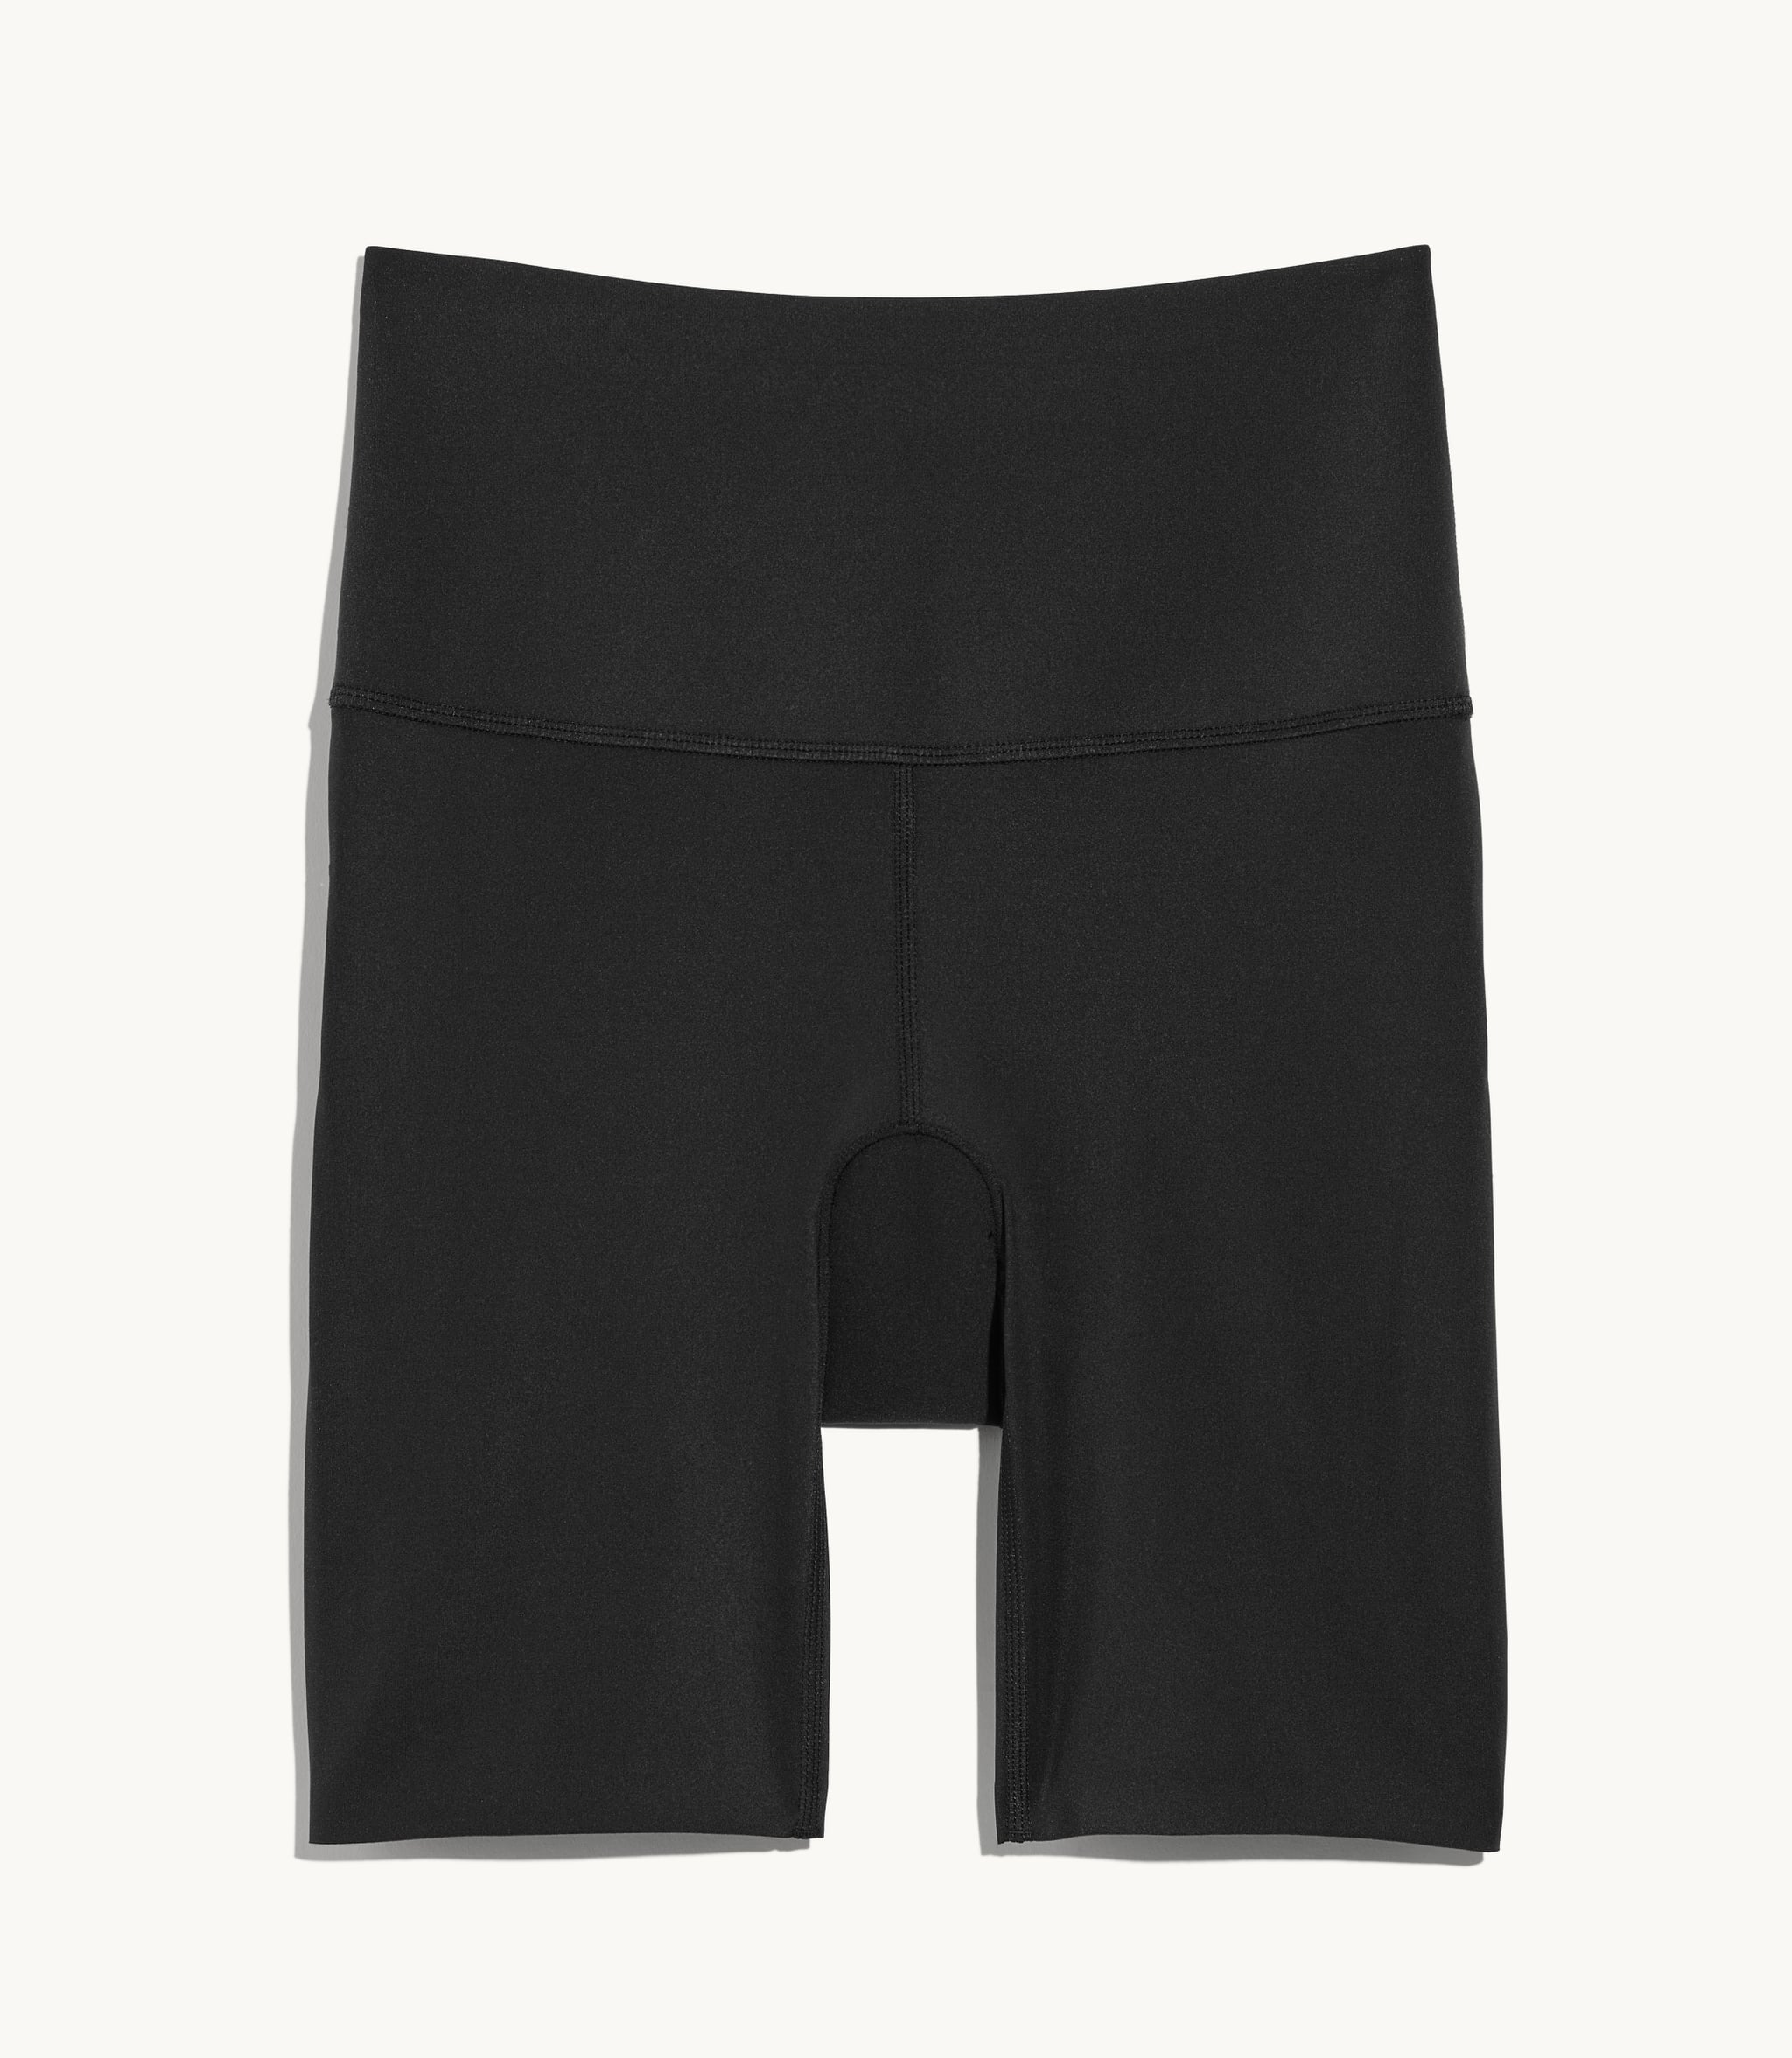 Knix Active with Ashley Graham Go with the Flow™️ High Rise Leakproof Short, Knix's Activewear Collection with Ashley Graham Just Dropped — Our Credit  Cards are Bracing Themselves